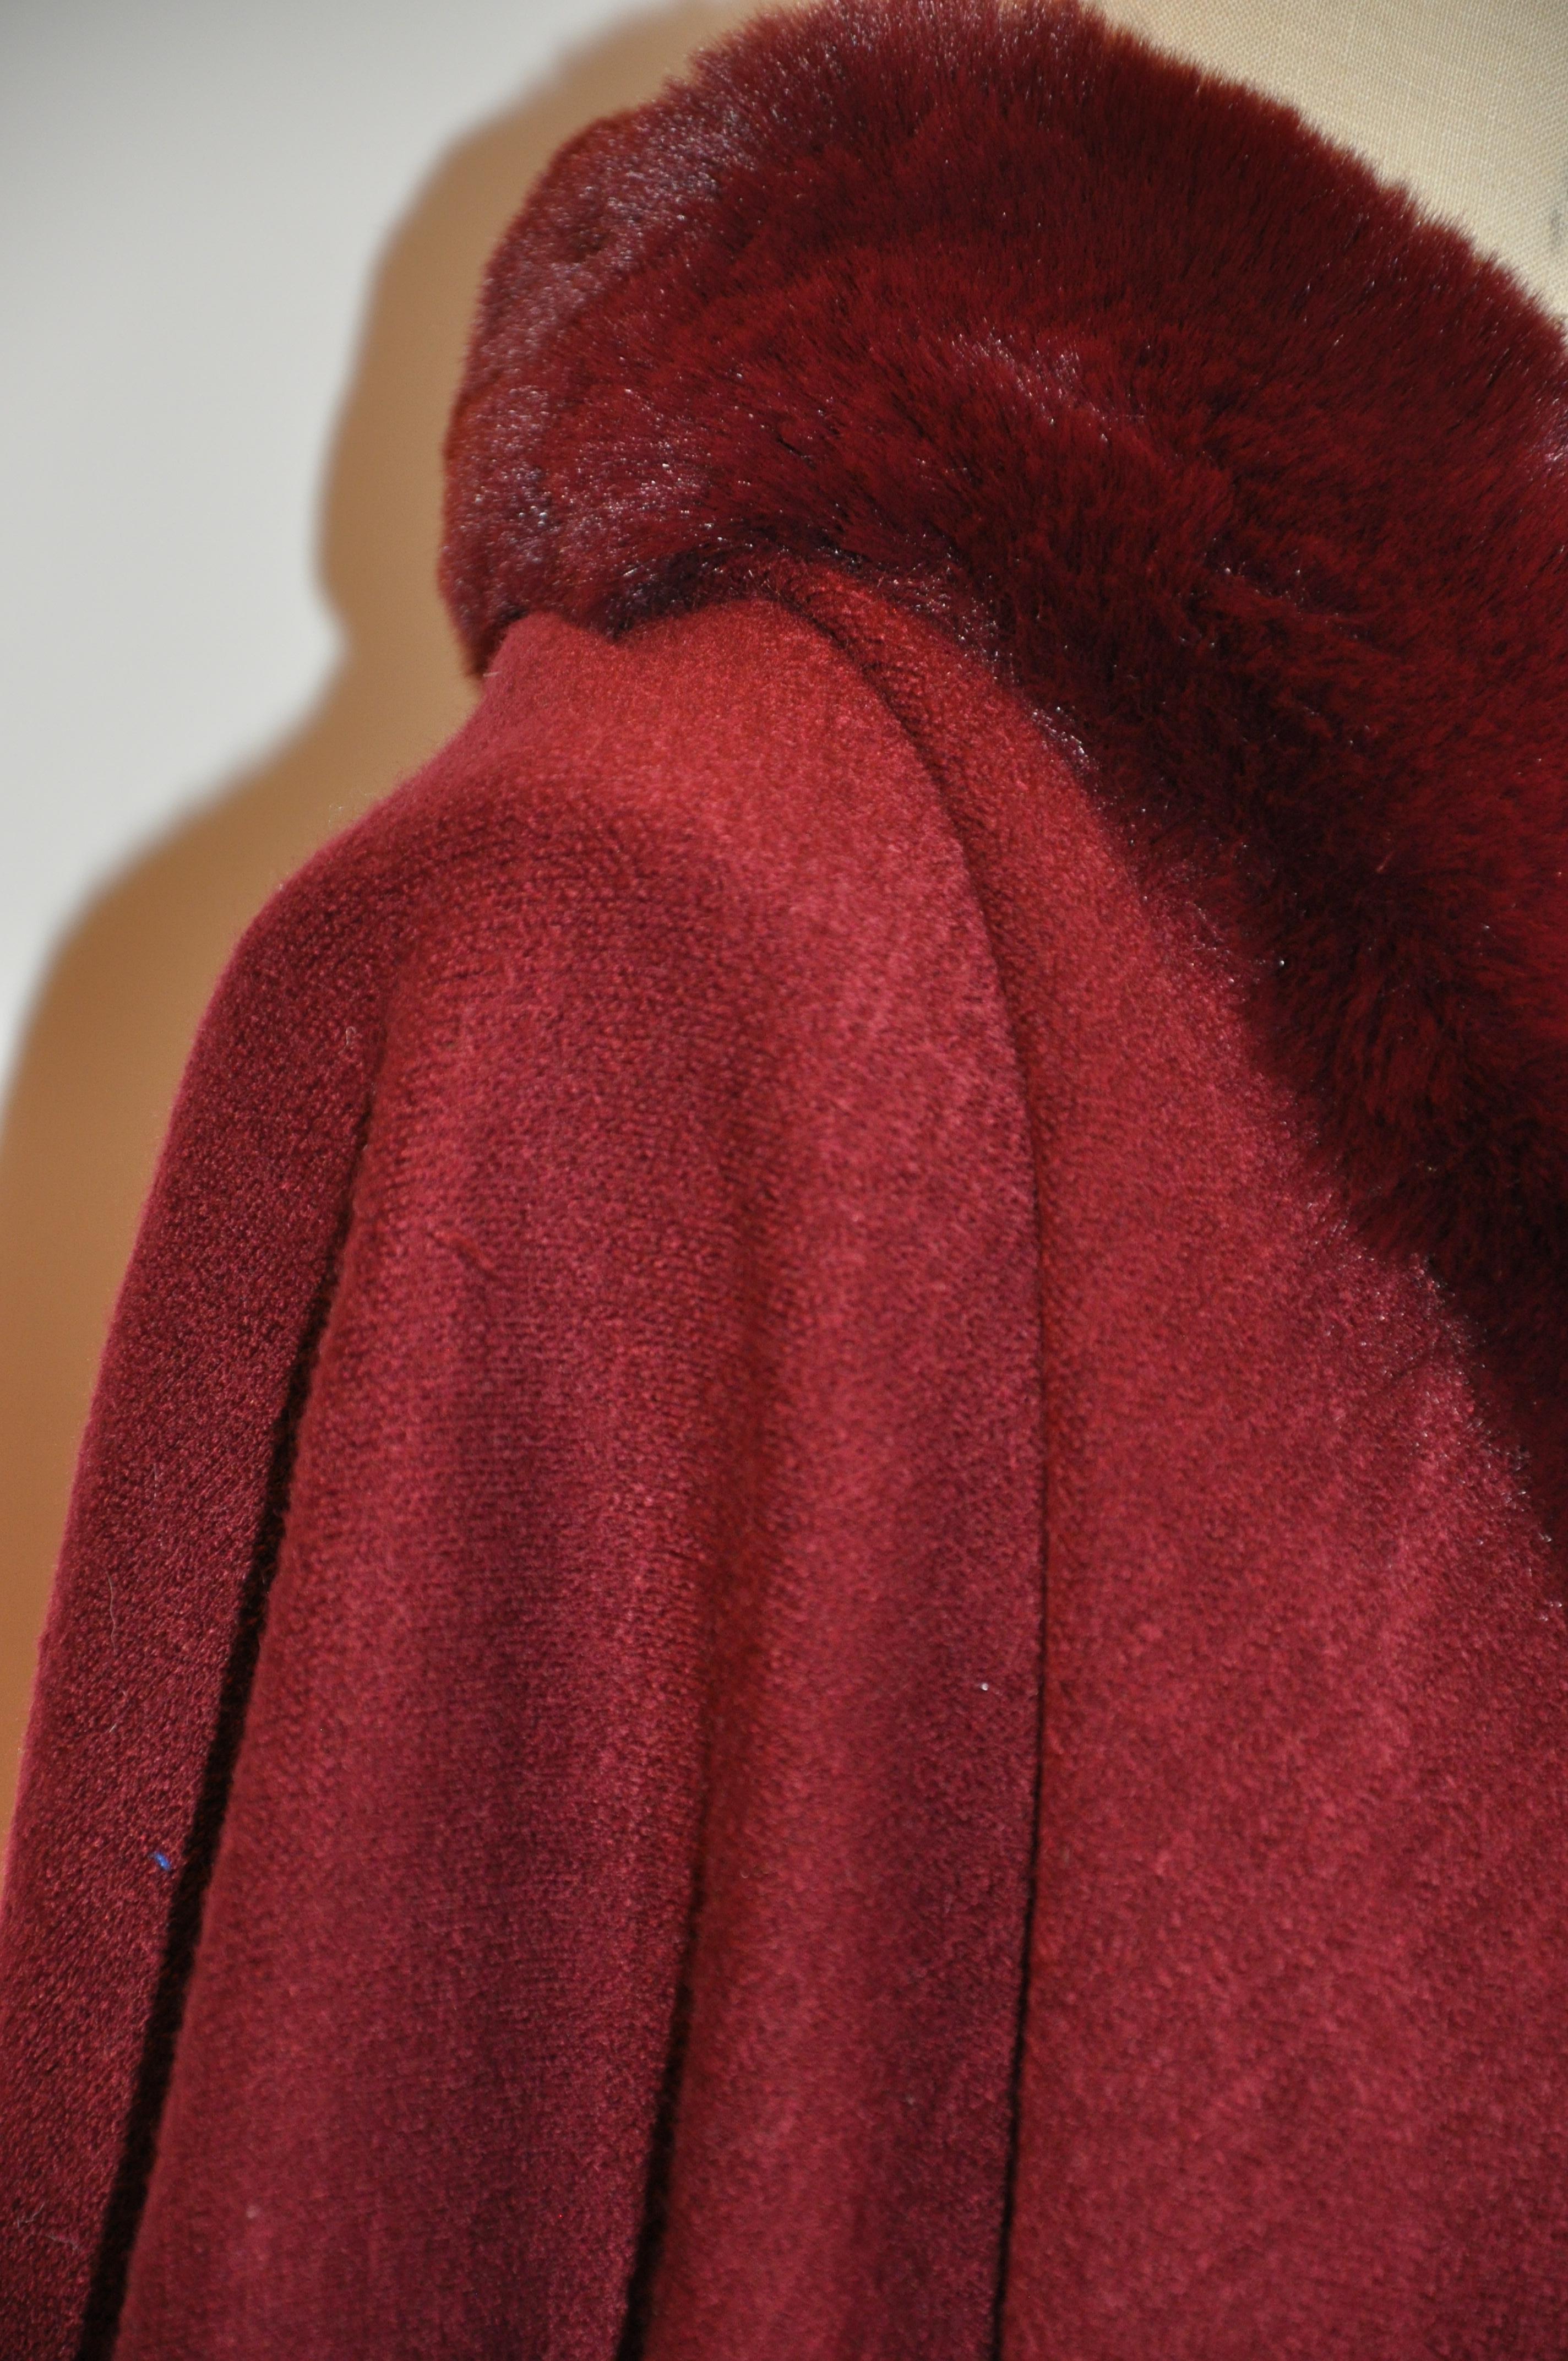 Adrienne Vittadini Luxurious Rich Burgundy Faux Fur Evening Poncho In Good Condition For Sale In New York, NY